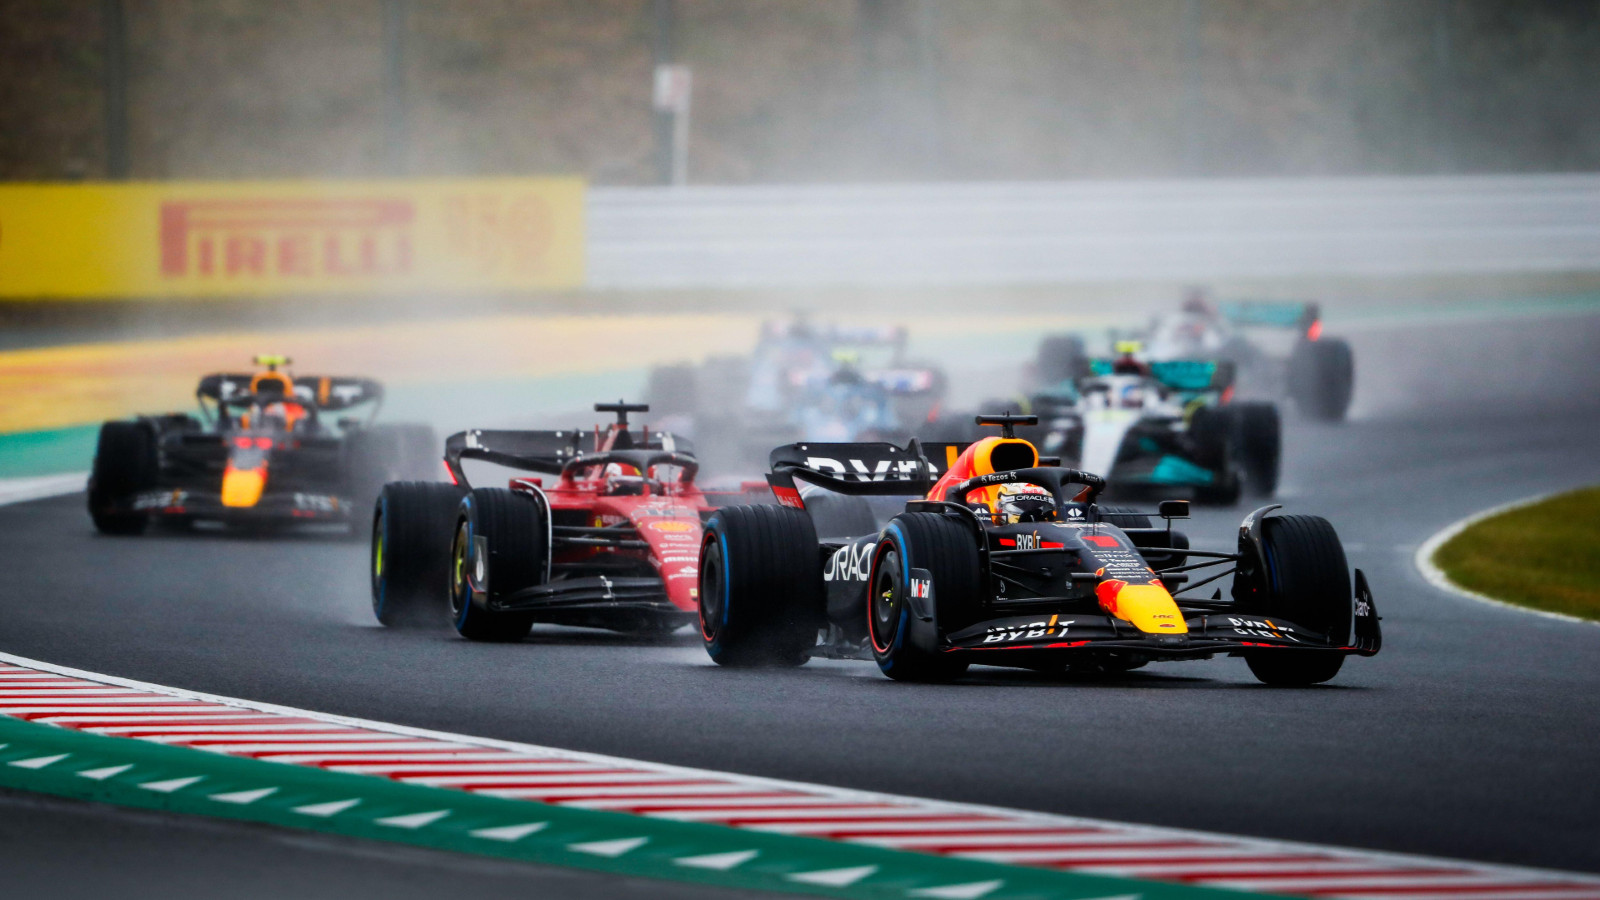 Red Bull's Max Verstappen leads Ferrari's Charles Leclerc at the Japanese Grand Prix. Suzuka, October 2022.point